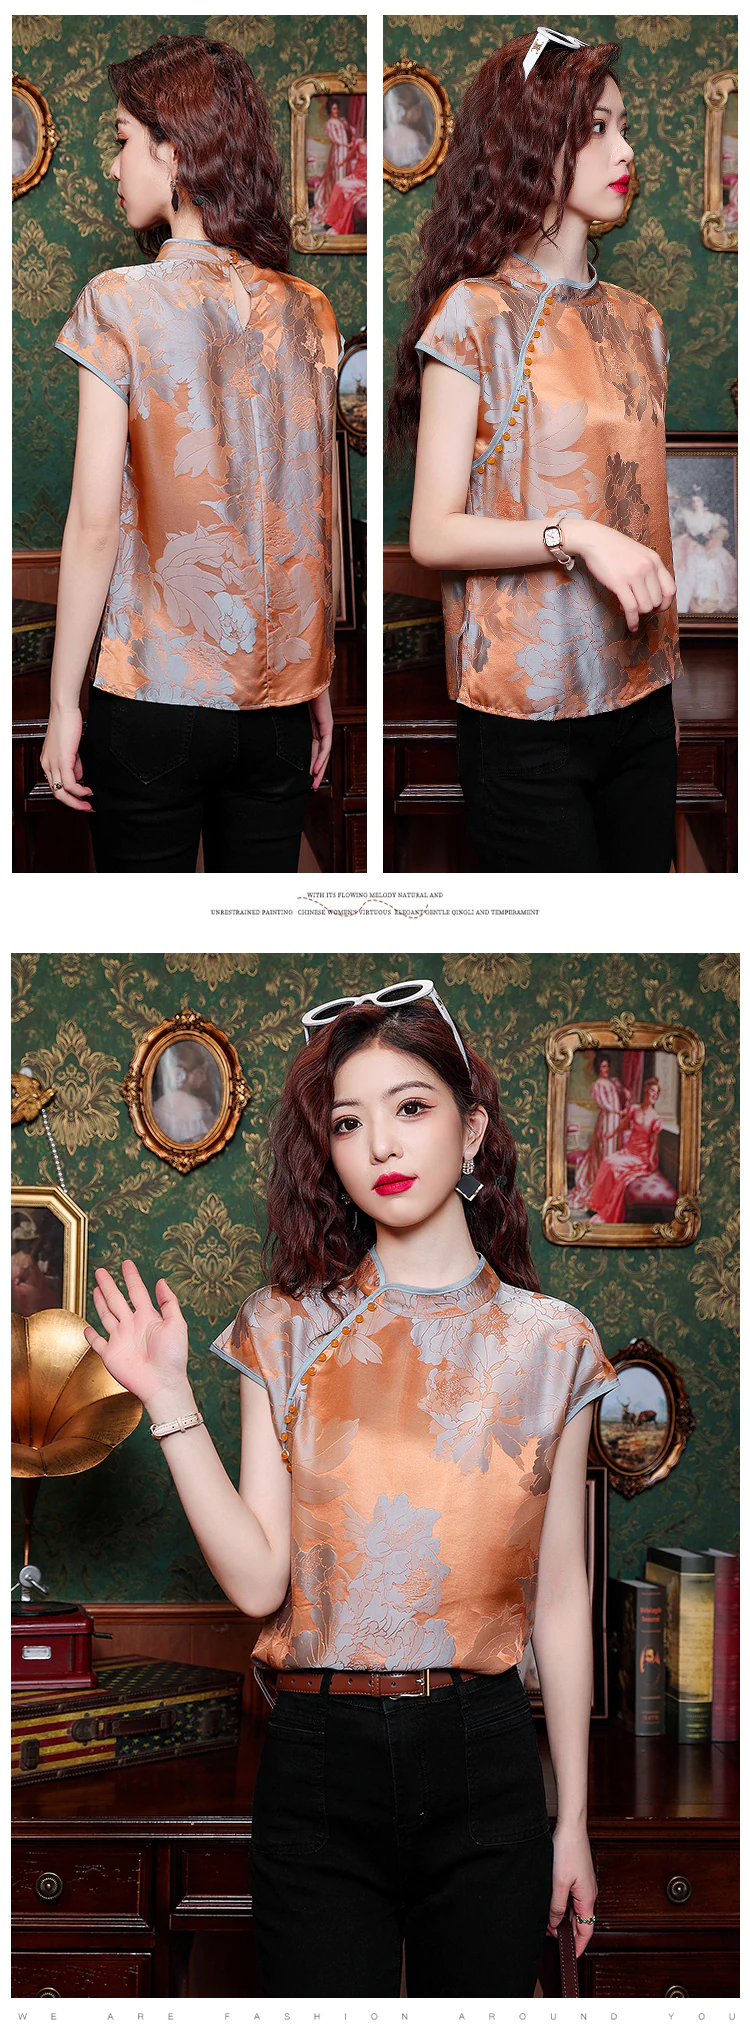 Ladies-Floral-Printed-Short-Sleeve-Summer-Lace-Satin-Pullover-Shirt16